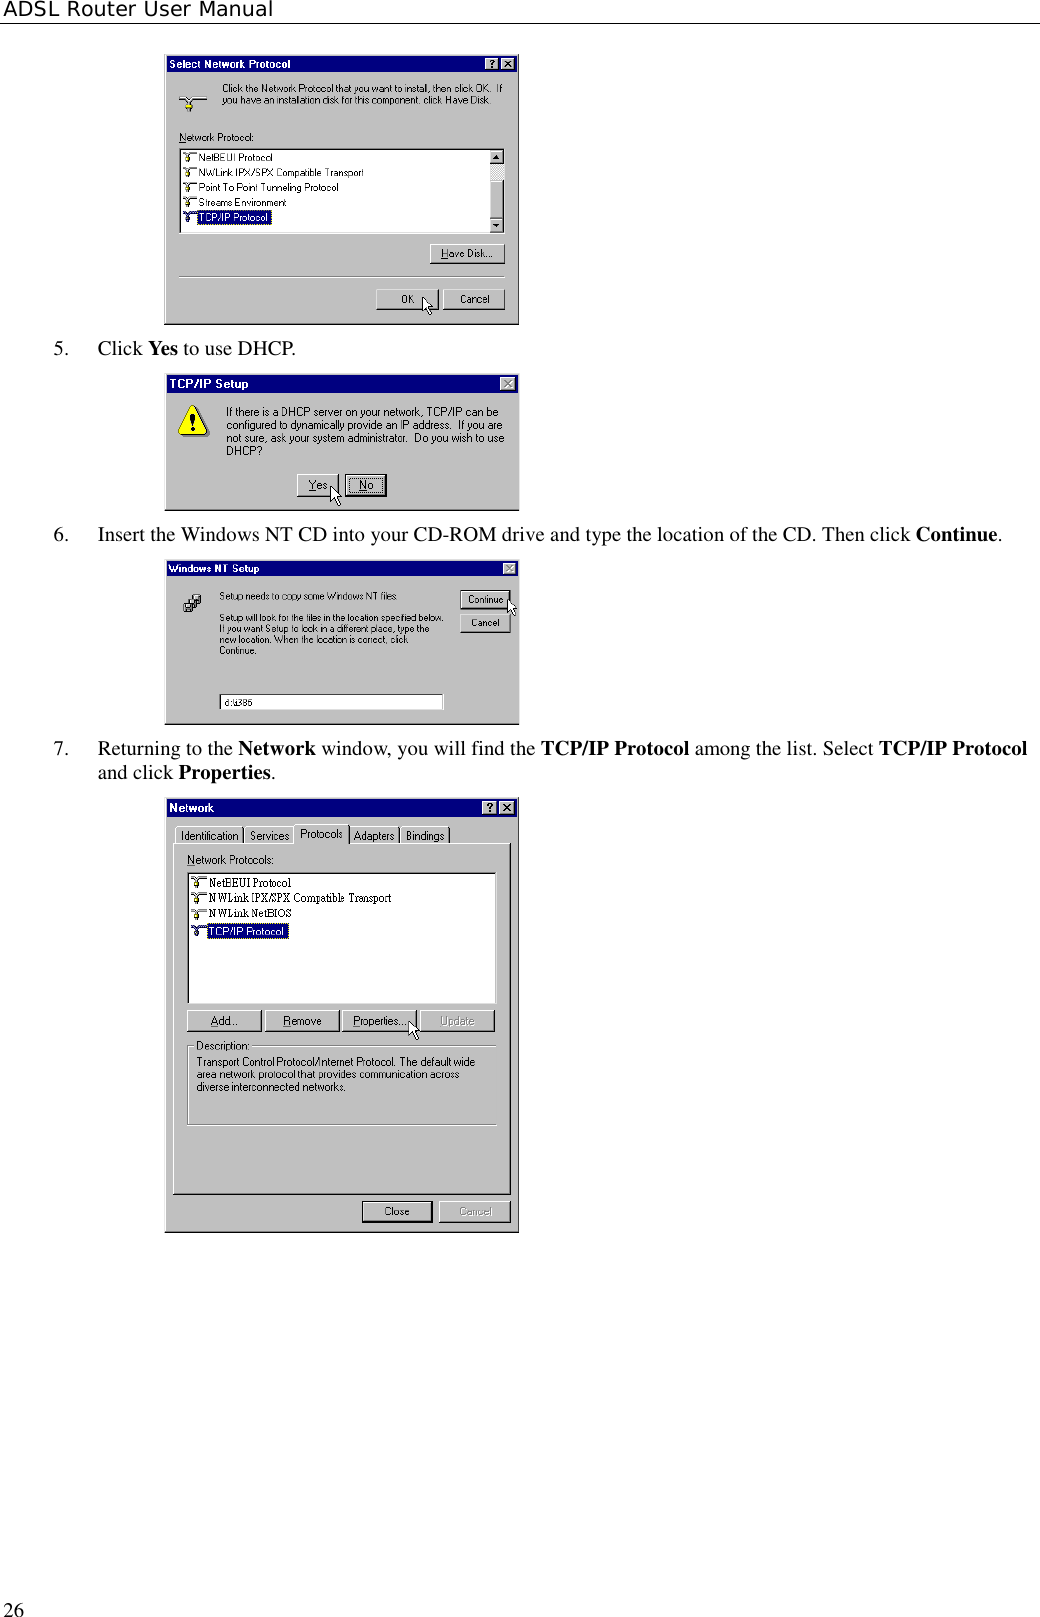 ADSL Router User Manual265. Click Yes to use DHCP.6. Insert the Windows NT CD into your CD-ROM drive and type the location of the CD. Then click Continue.7. Returning to the Network window, you will find the TCP/IP Protocol among the list. Select TCP/IP Protocoland click Properties.